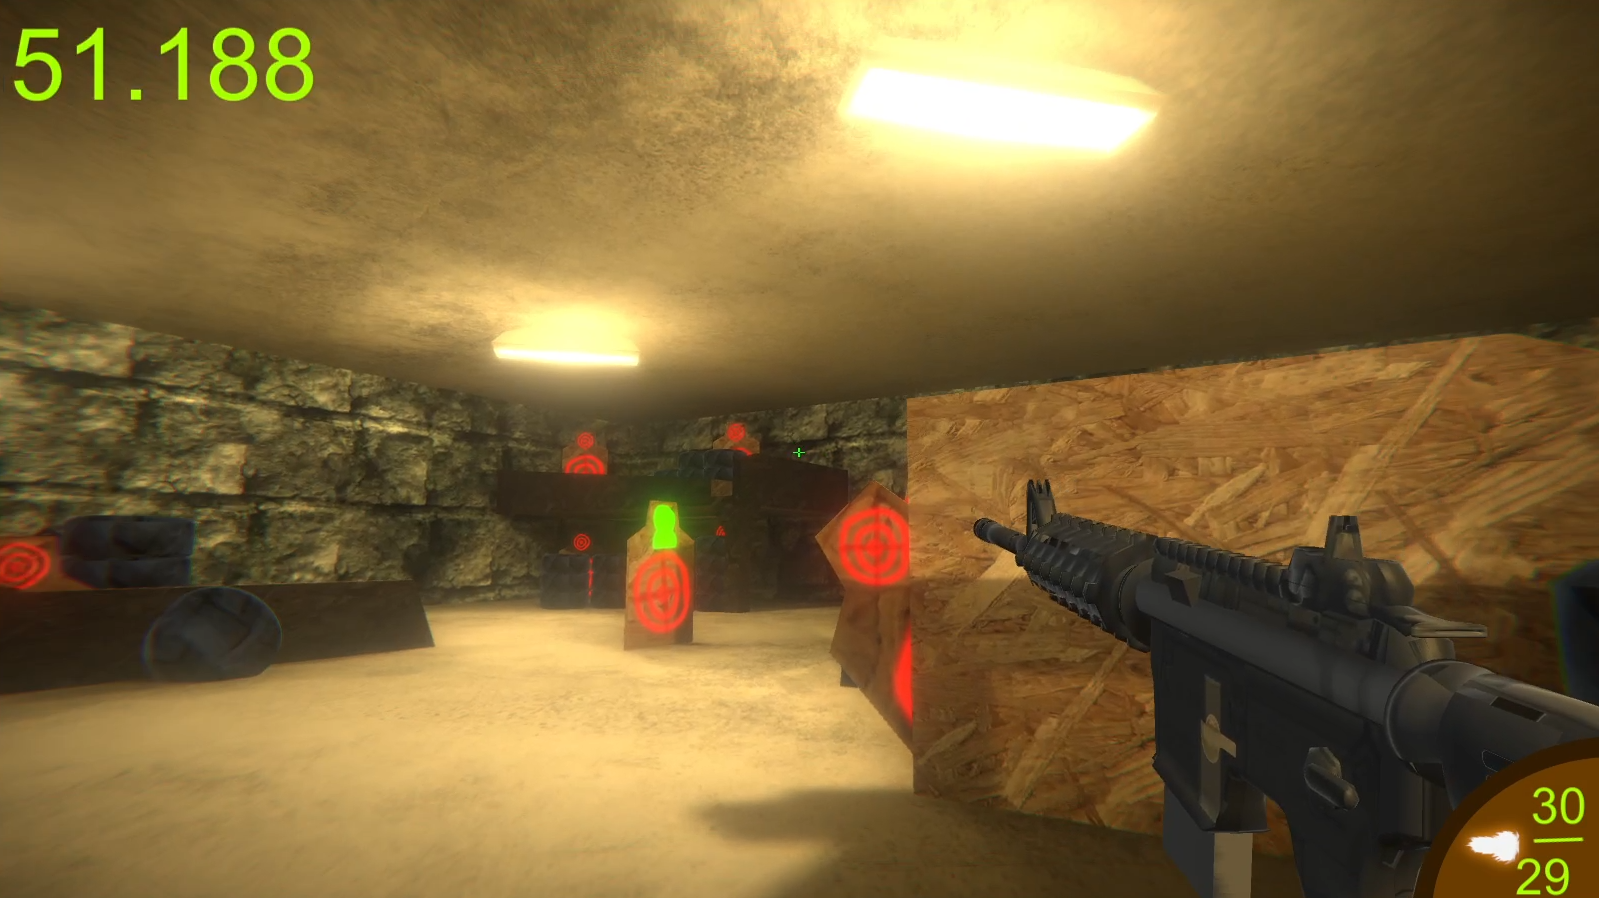 KillHouse - Browser 3D fps speed running game by Tiny Tap for Blackthornprod GAME JAM #3